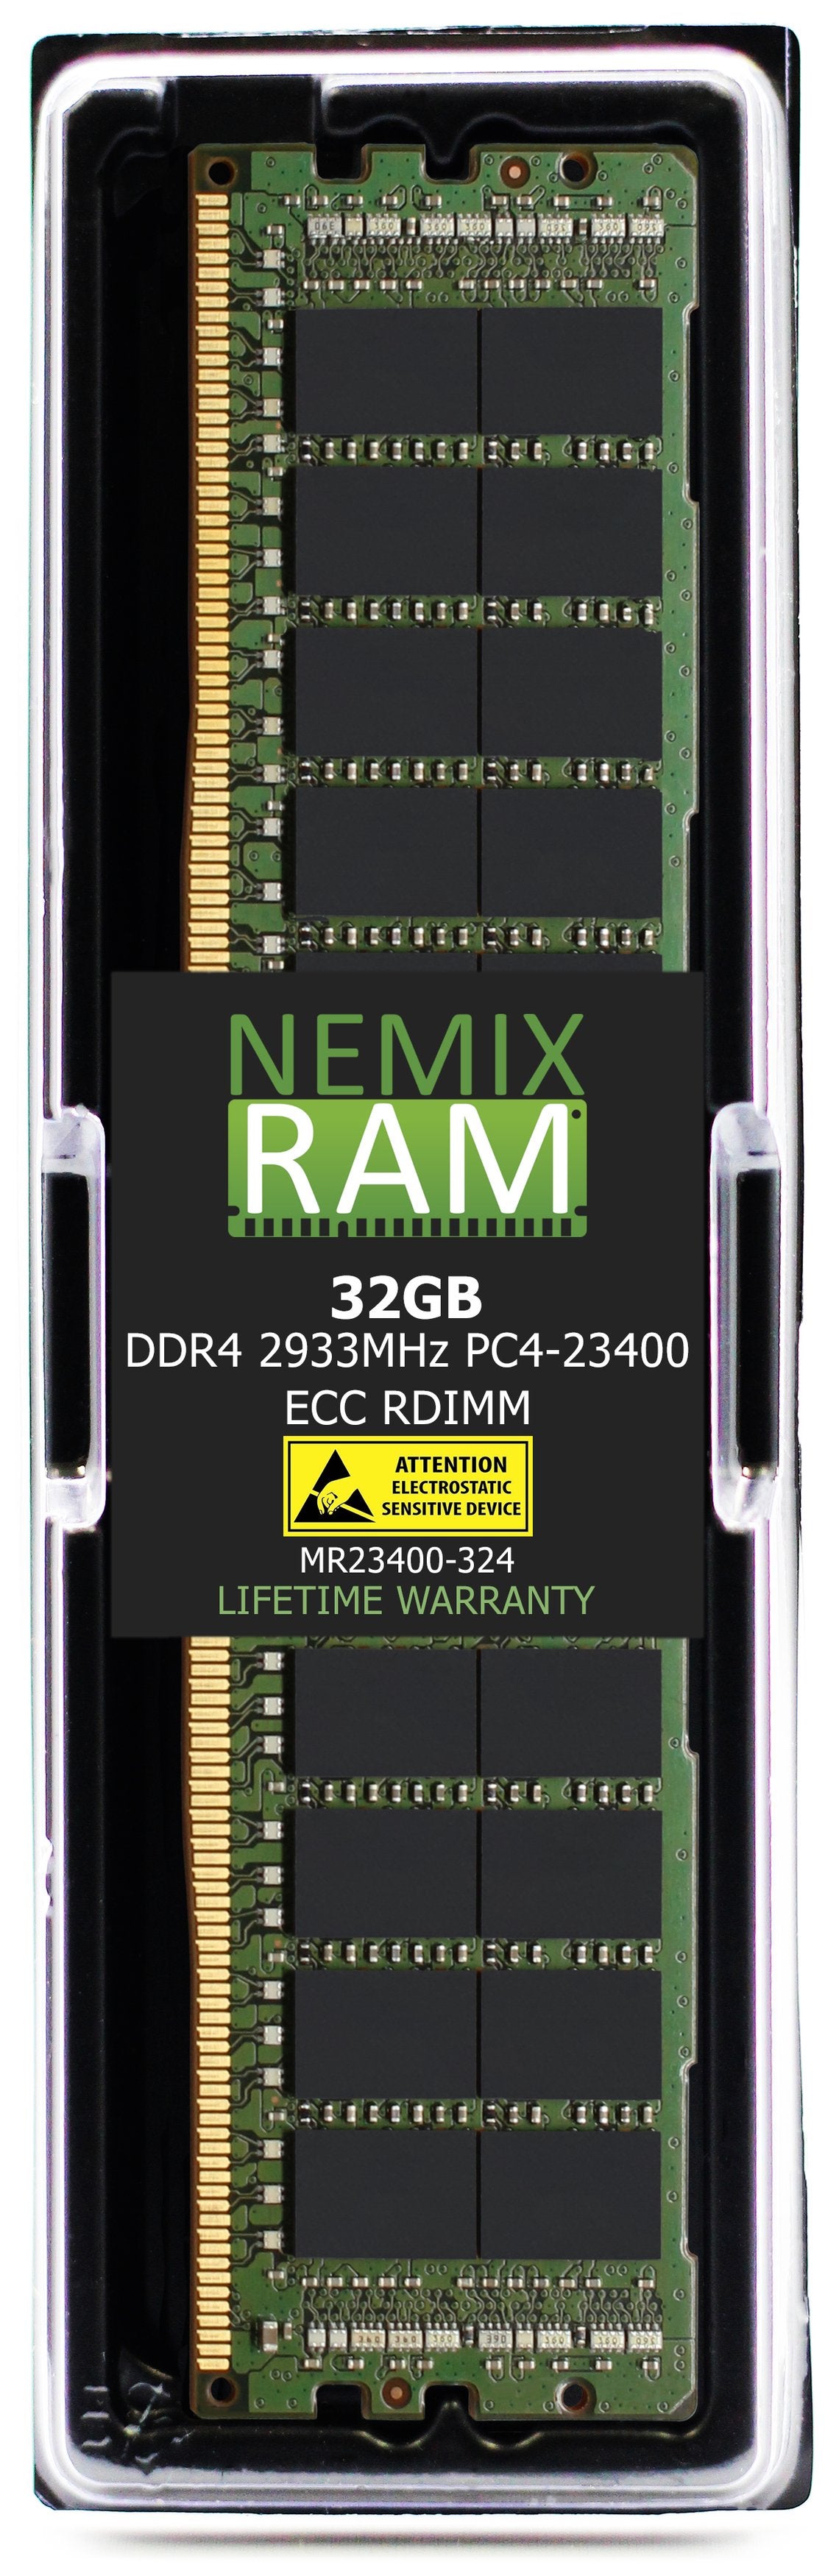 32GB DDR4 2933MHZ PC4-23400 RDIMM Compatible with Supermicro MEM-DR432LC-ER29